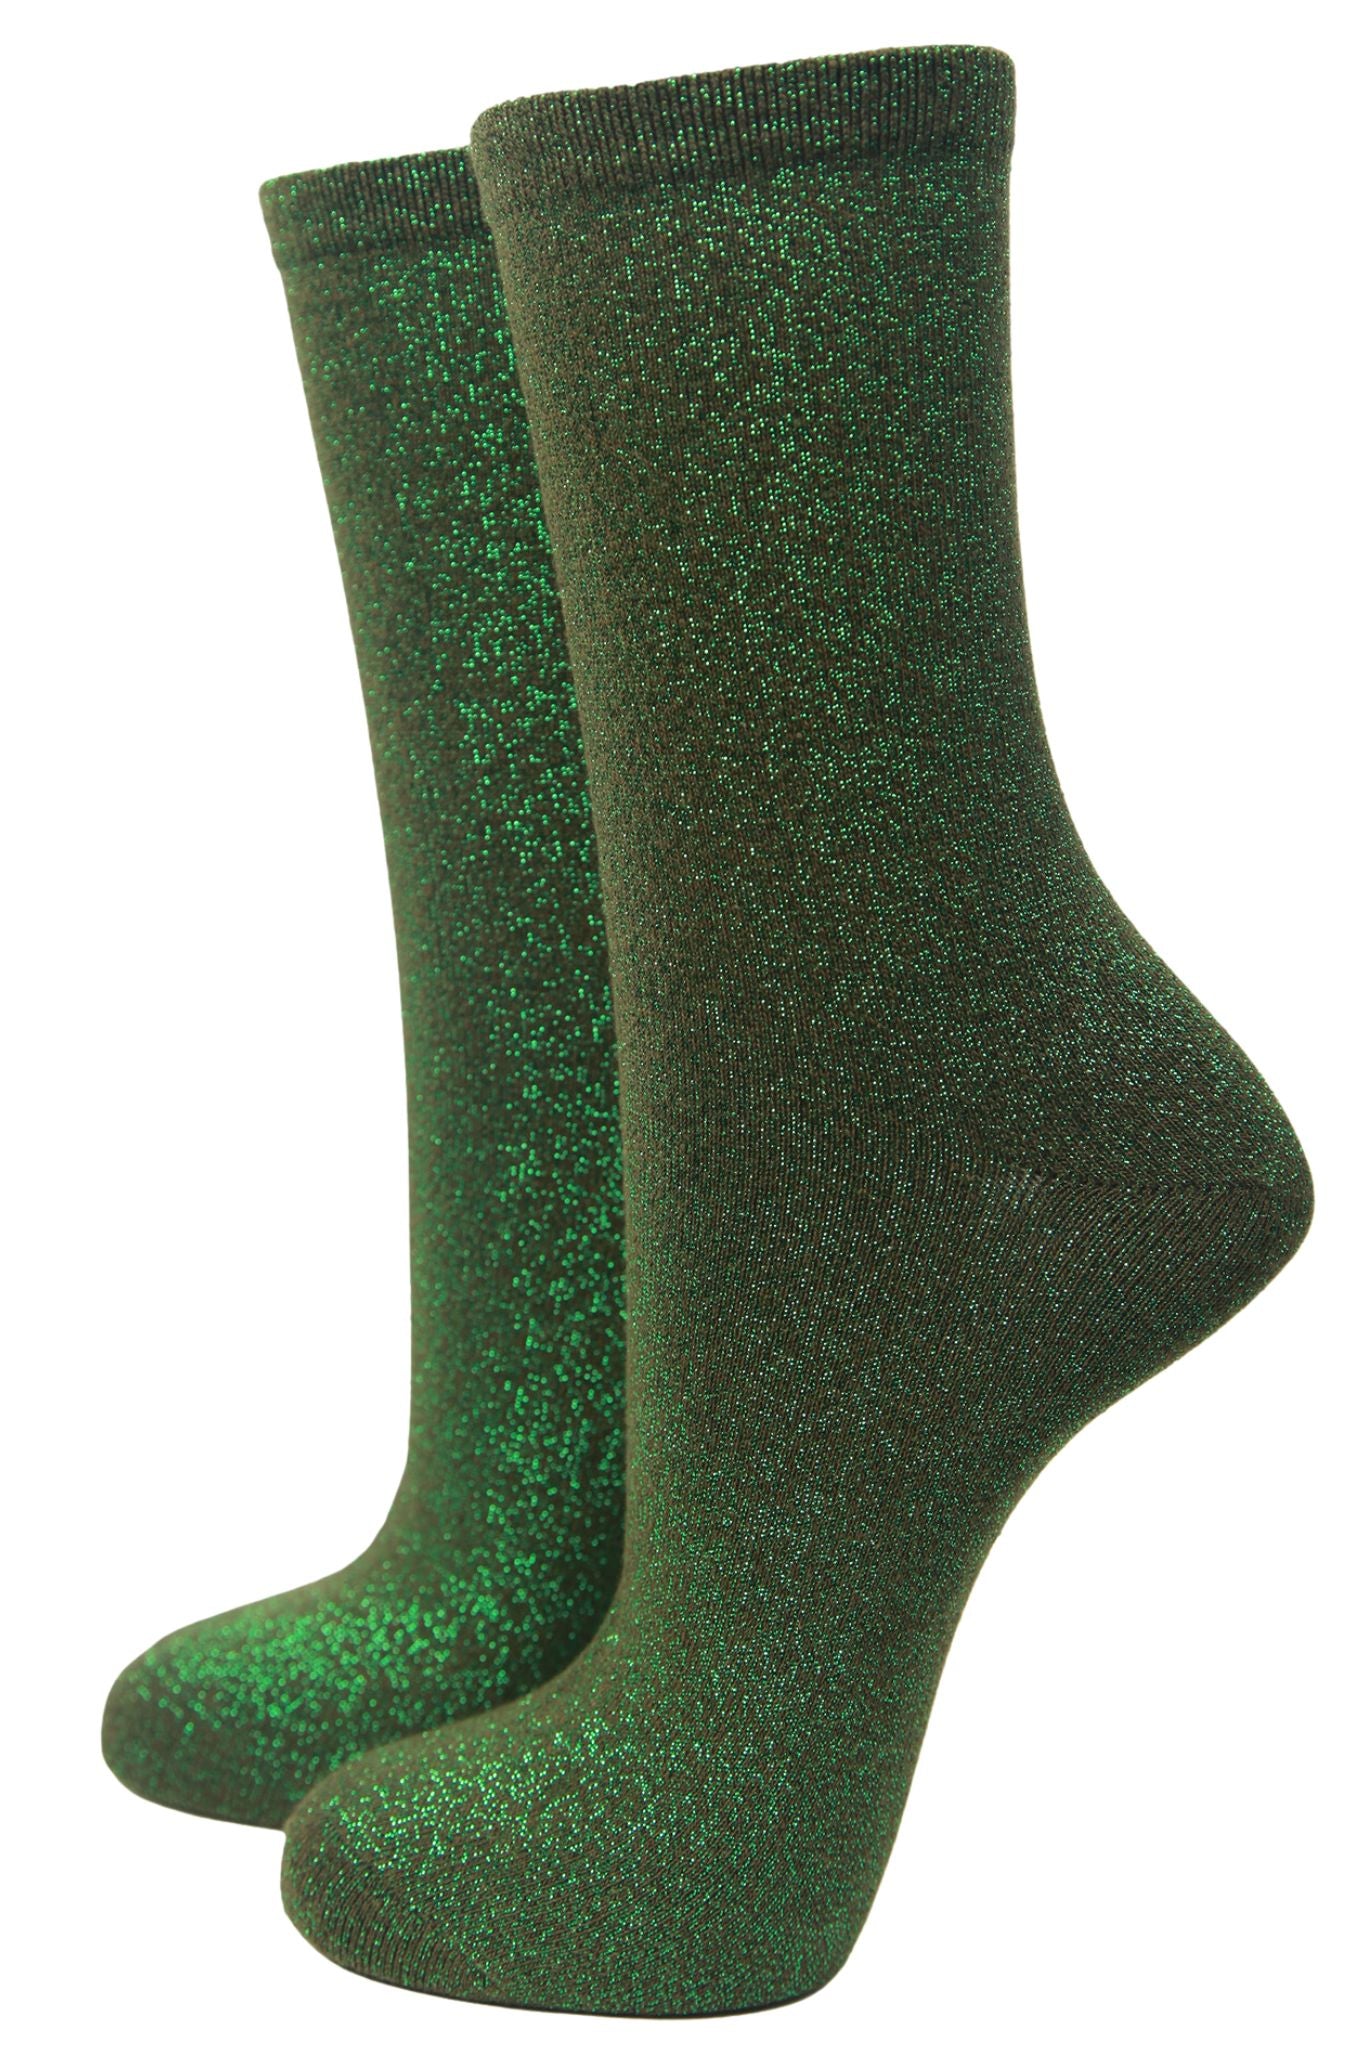 khaki green ankle socks with an all over green glitter sparkle